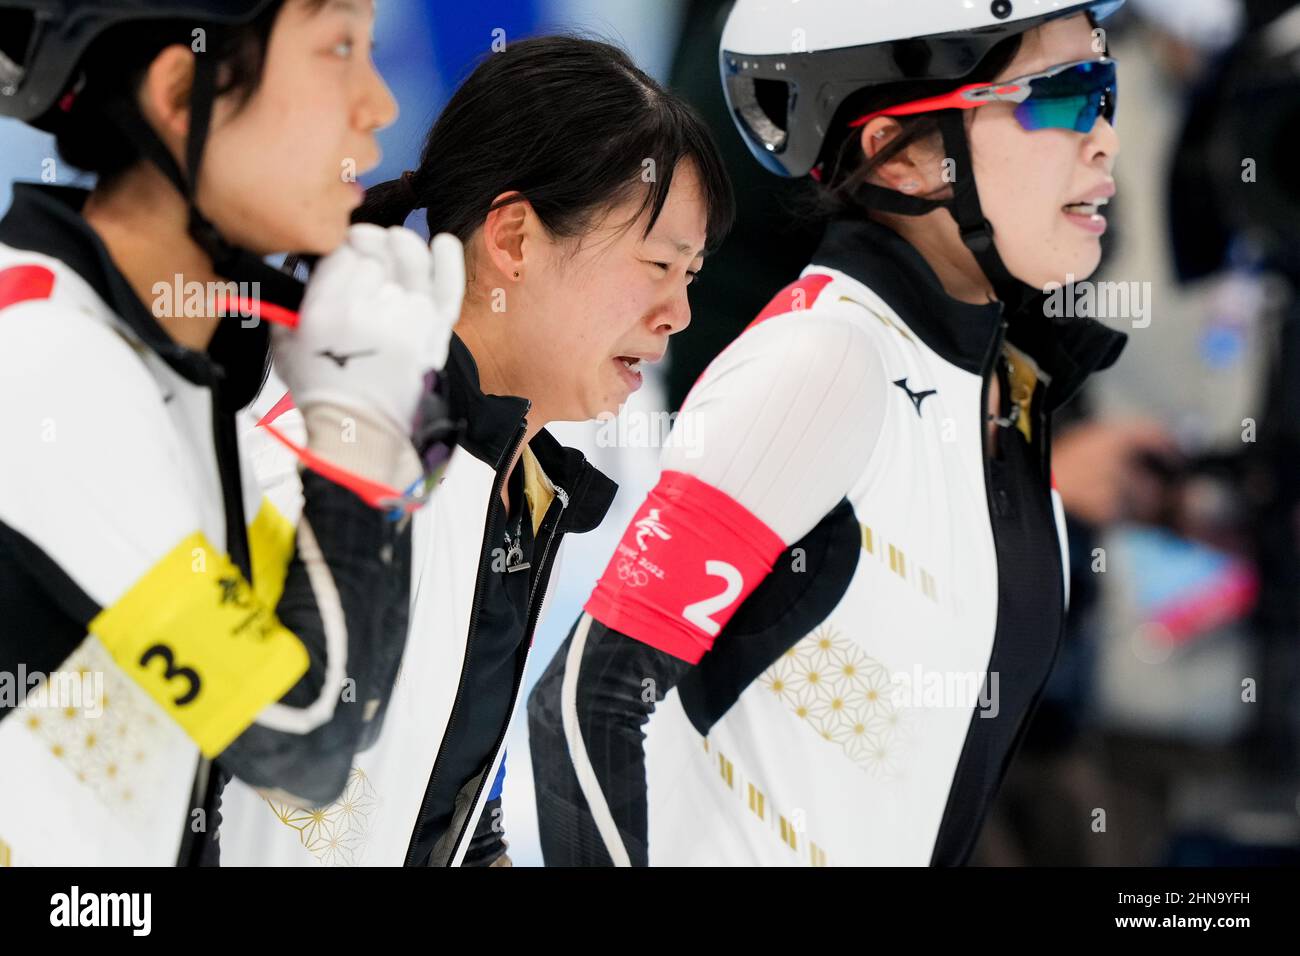 BEIJING, CHINA - FEBRUARY 15: Nana Takagi of Japan is sad and cries after her fall in the final for gold competing on the Women's Team Pursuit during the Beijing 2022 Olympic Games at the National Speedskating Oval on February 15, 2022 in Beijing, China (Photo by Douwe Bijlsma/Orange Pictures) NOCNSF Stock Photo